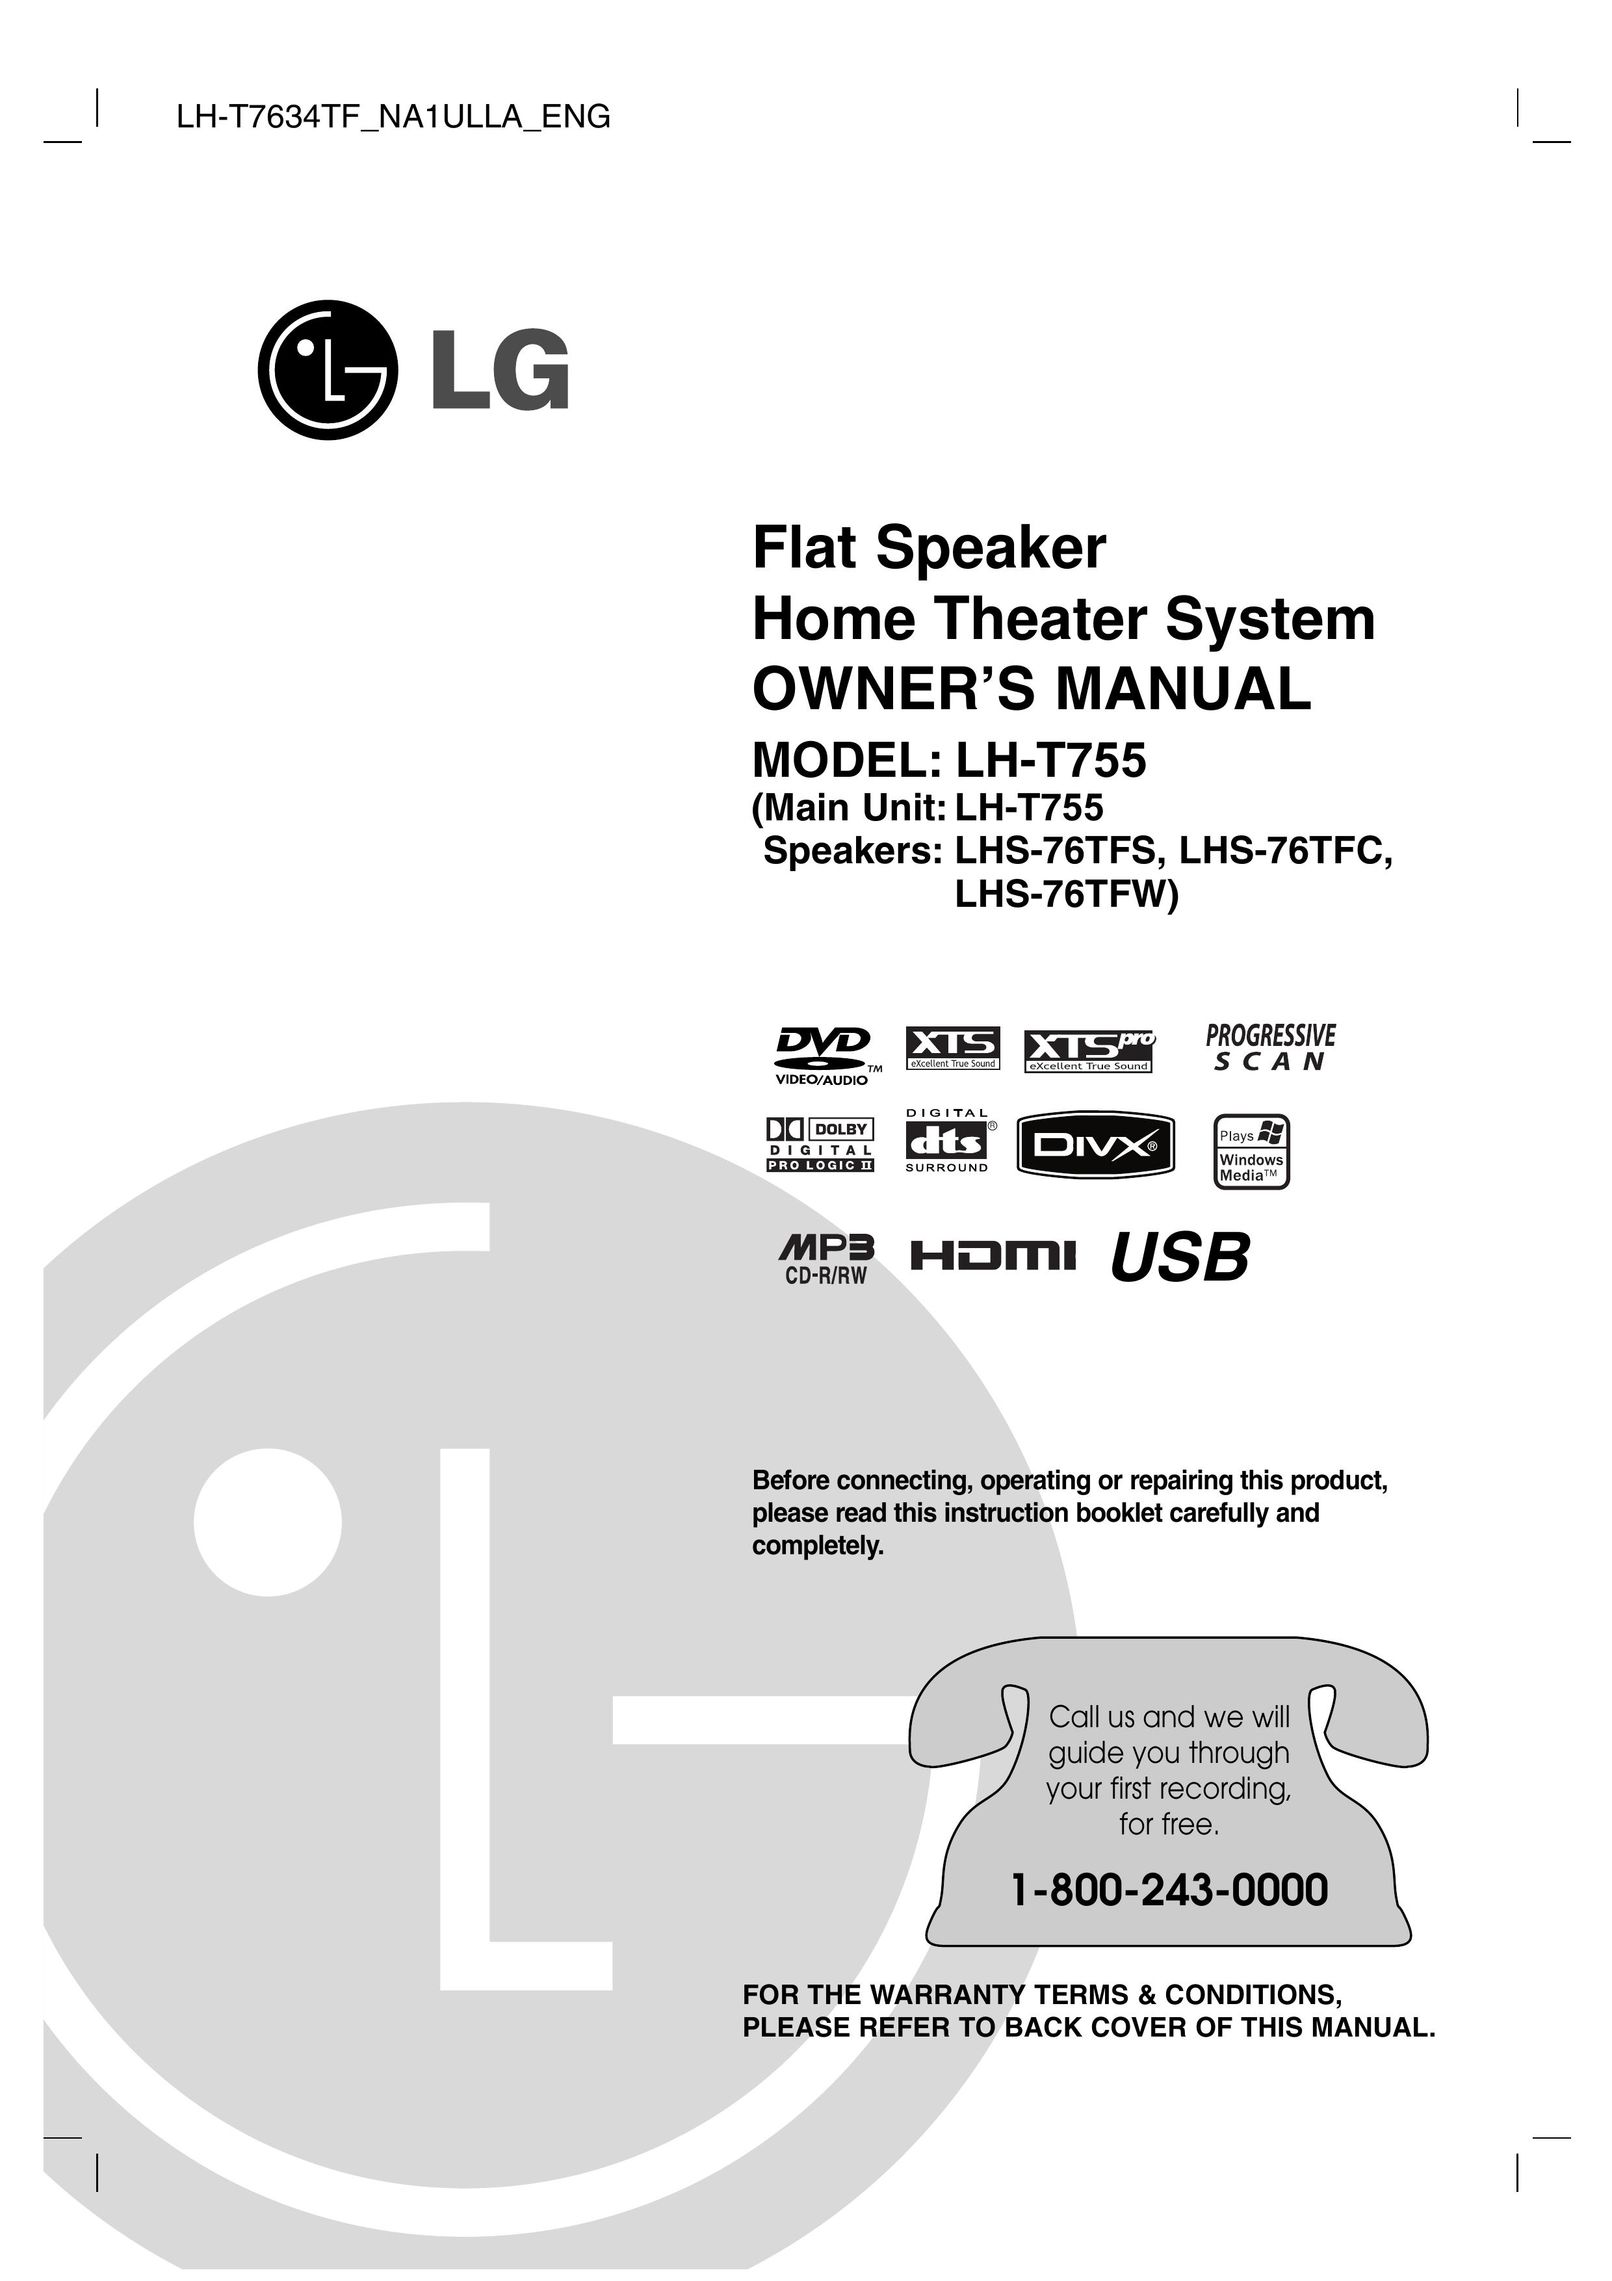 LG Electronics LH-T7634TF Home Theater System User Manual